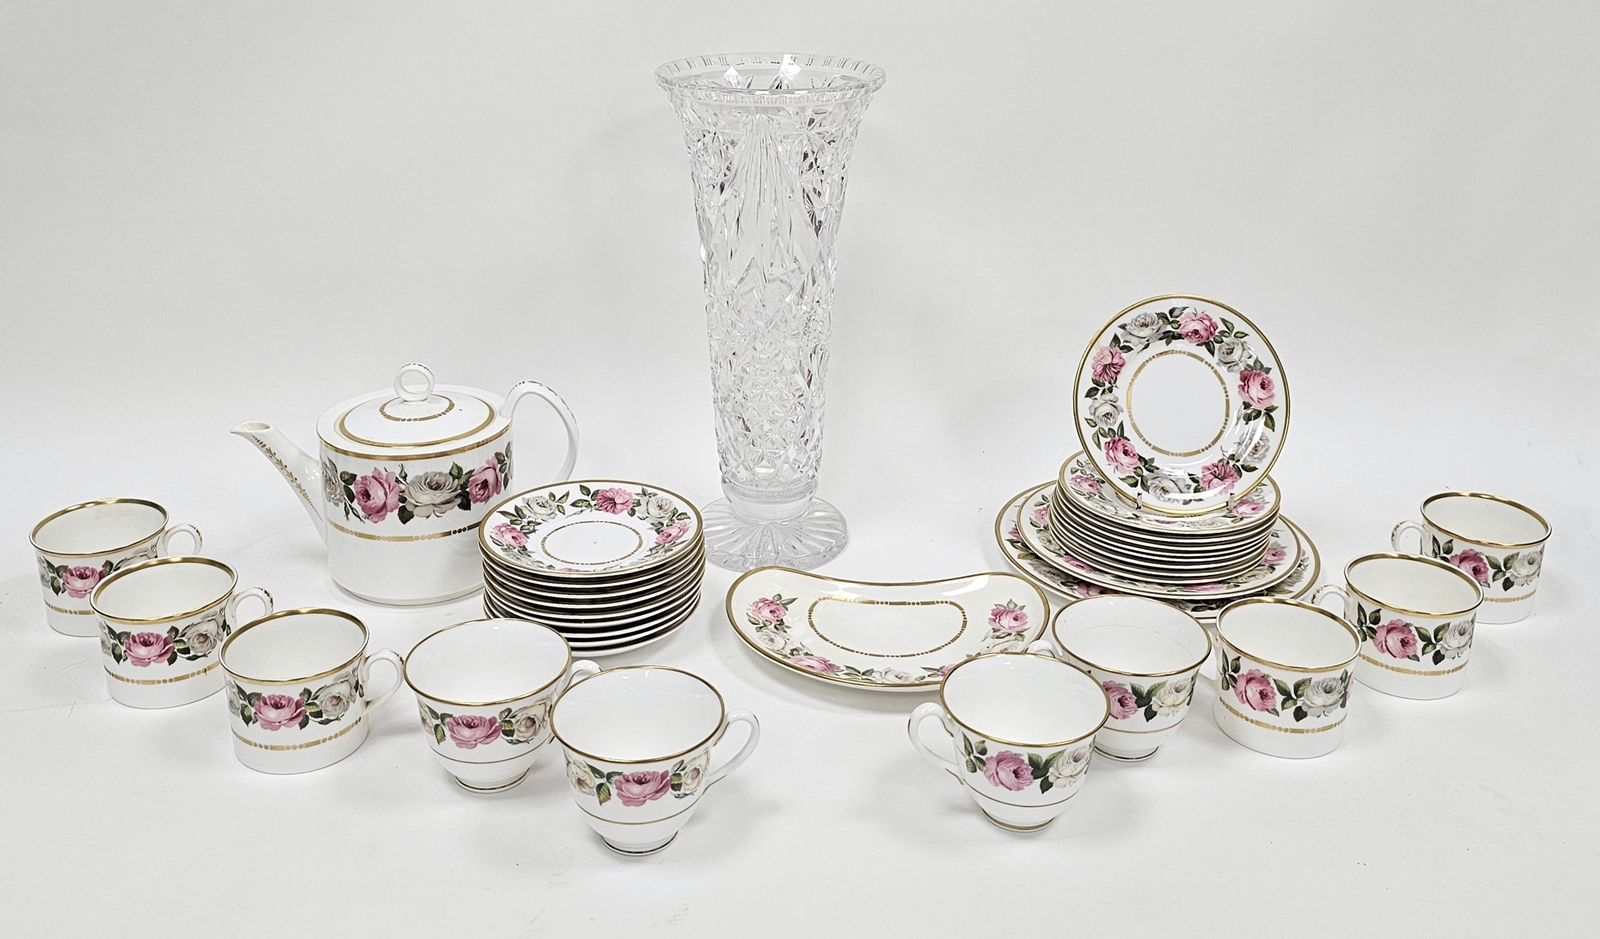 Composite Royal Worcester bone china 'Royal Garden' pattern part tea service, printed iron red